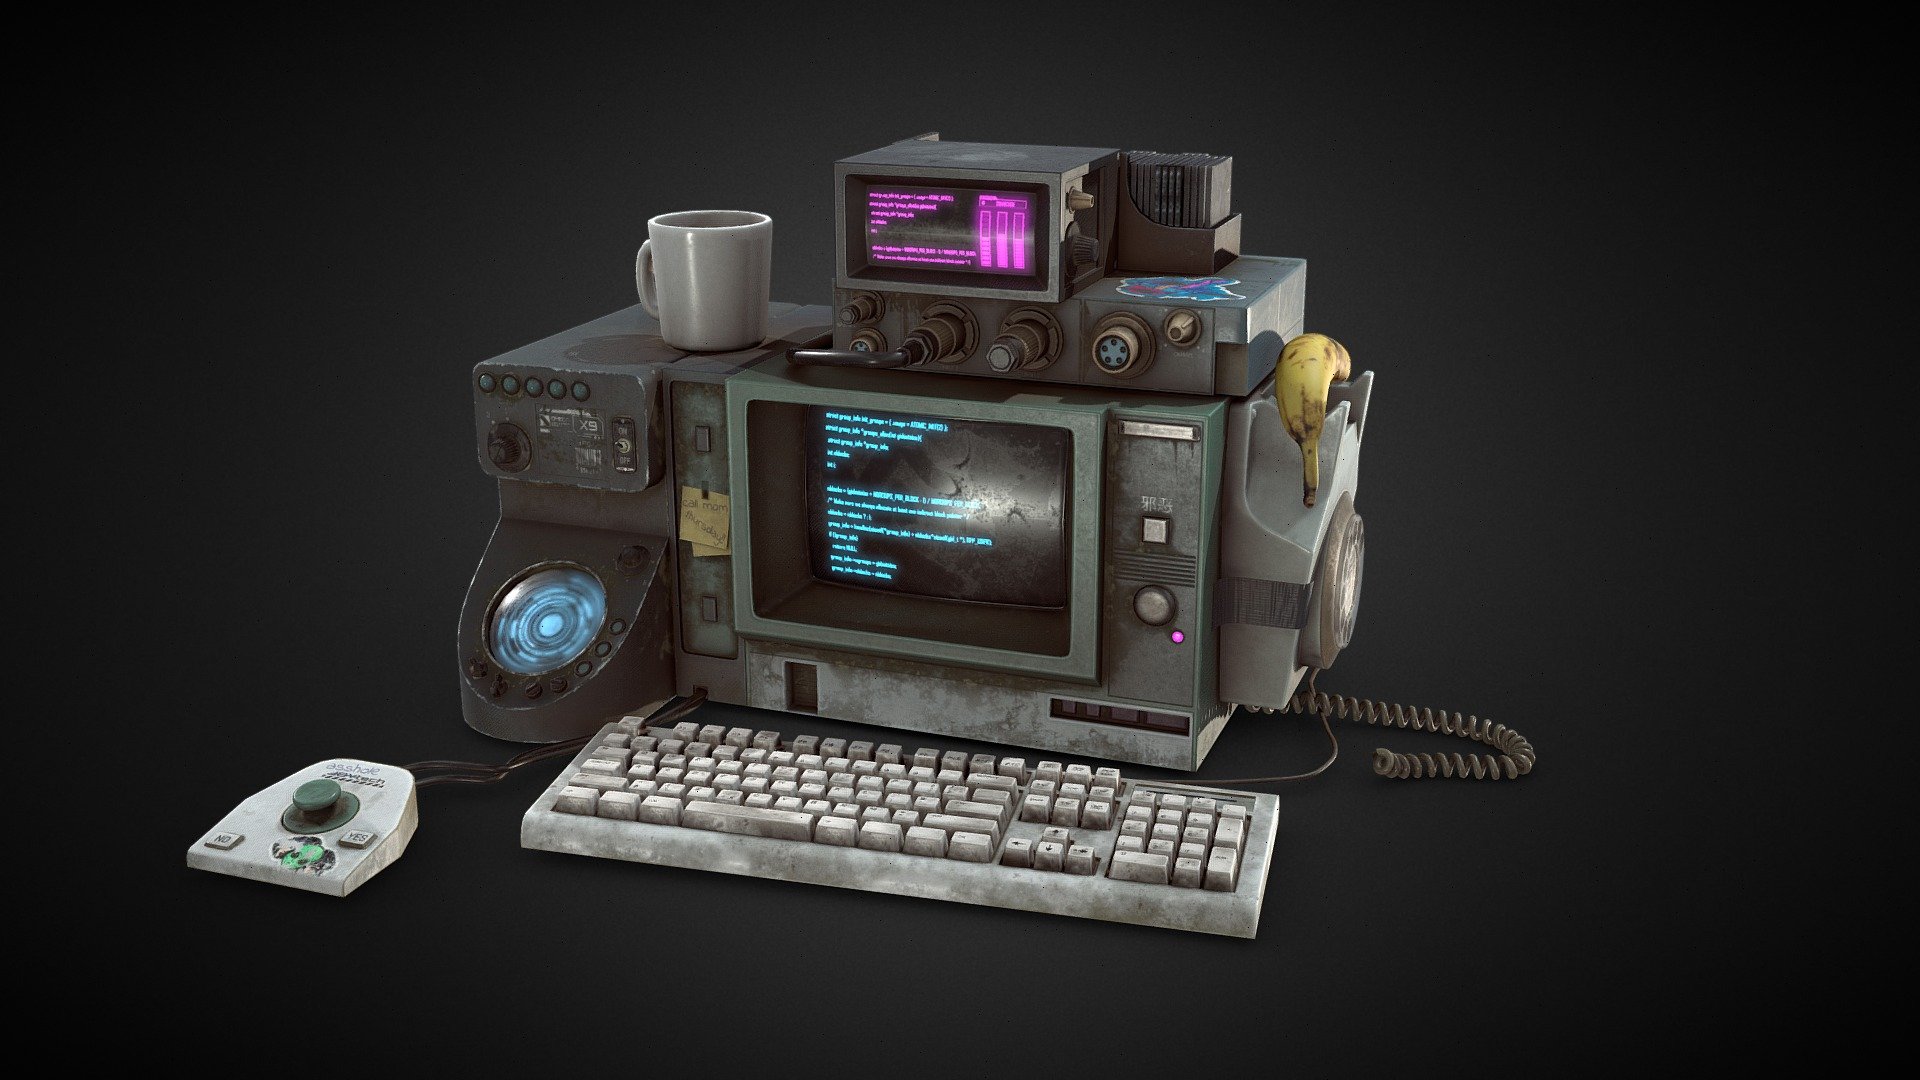 Cyberpunk Hacking Device [GAP Final Assignment] - 3D model by Alina  Roessner (@thennediel) [e6f02f4]